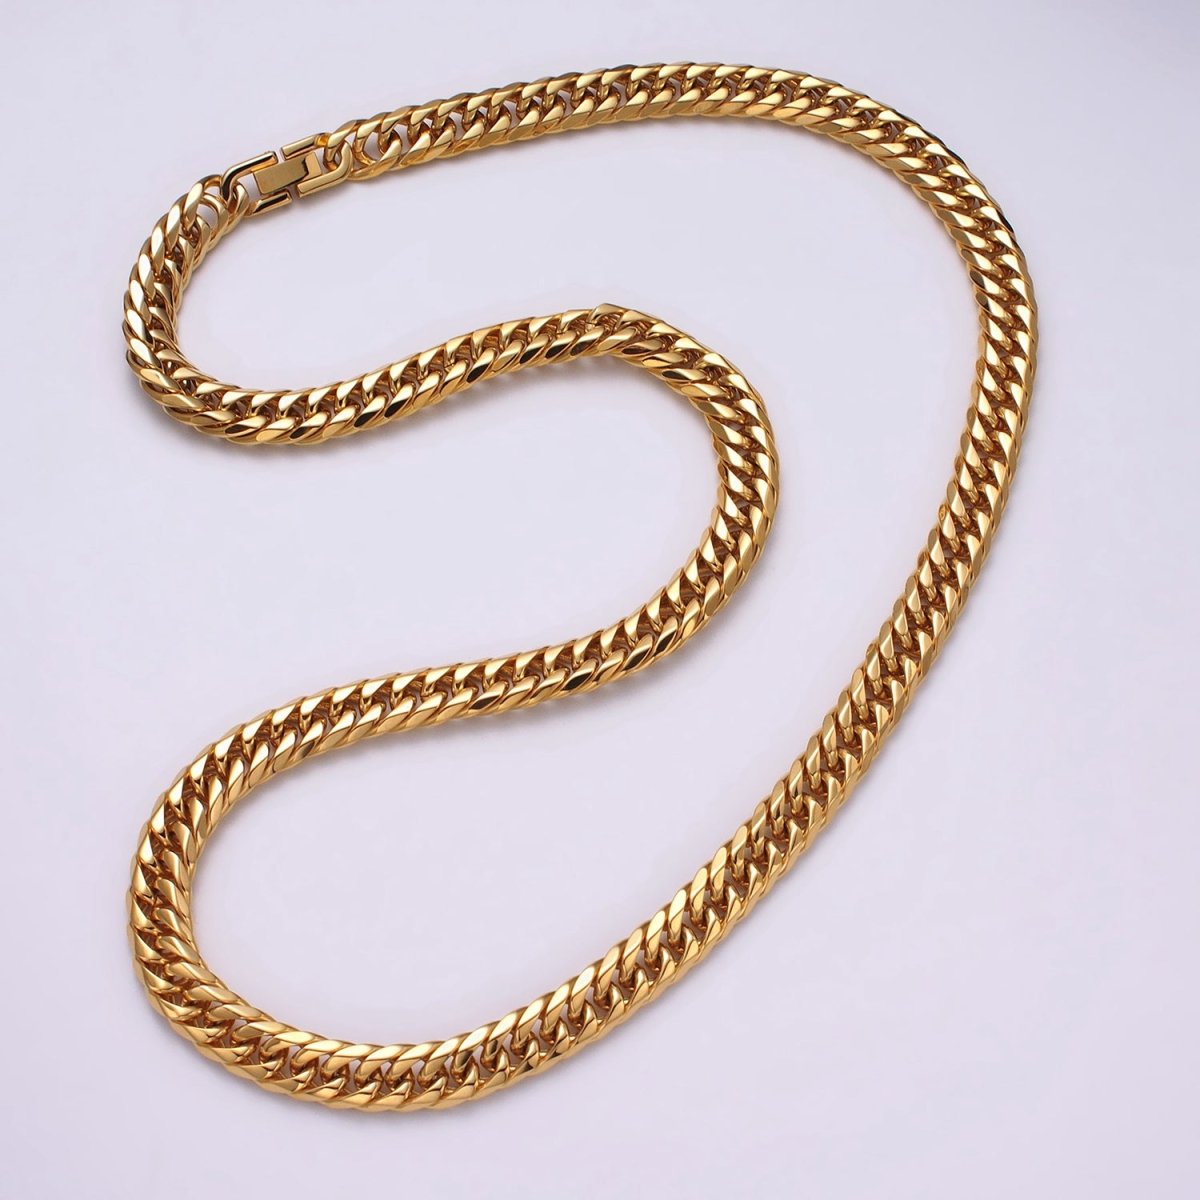 24.5 Inch Gold Cuban Curb Chain, Stainless Steel Heavy Flat Miami Cuban Curb for Men Necklace 8mm, 10mm, 12mm | WA-1717 to WA-1719 Clearance Pricing - DLUXCA